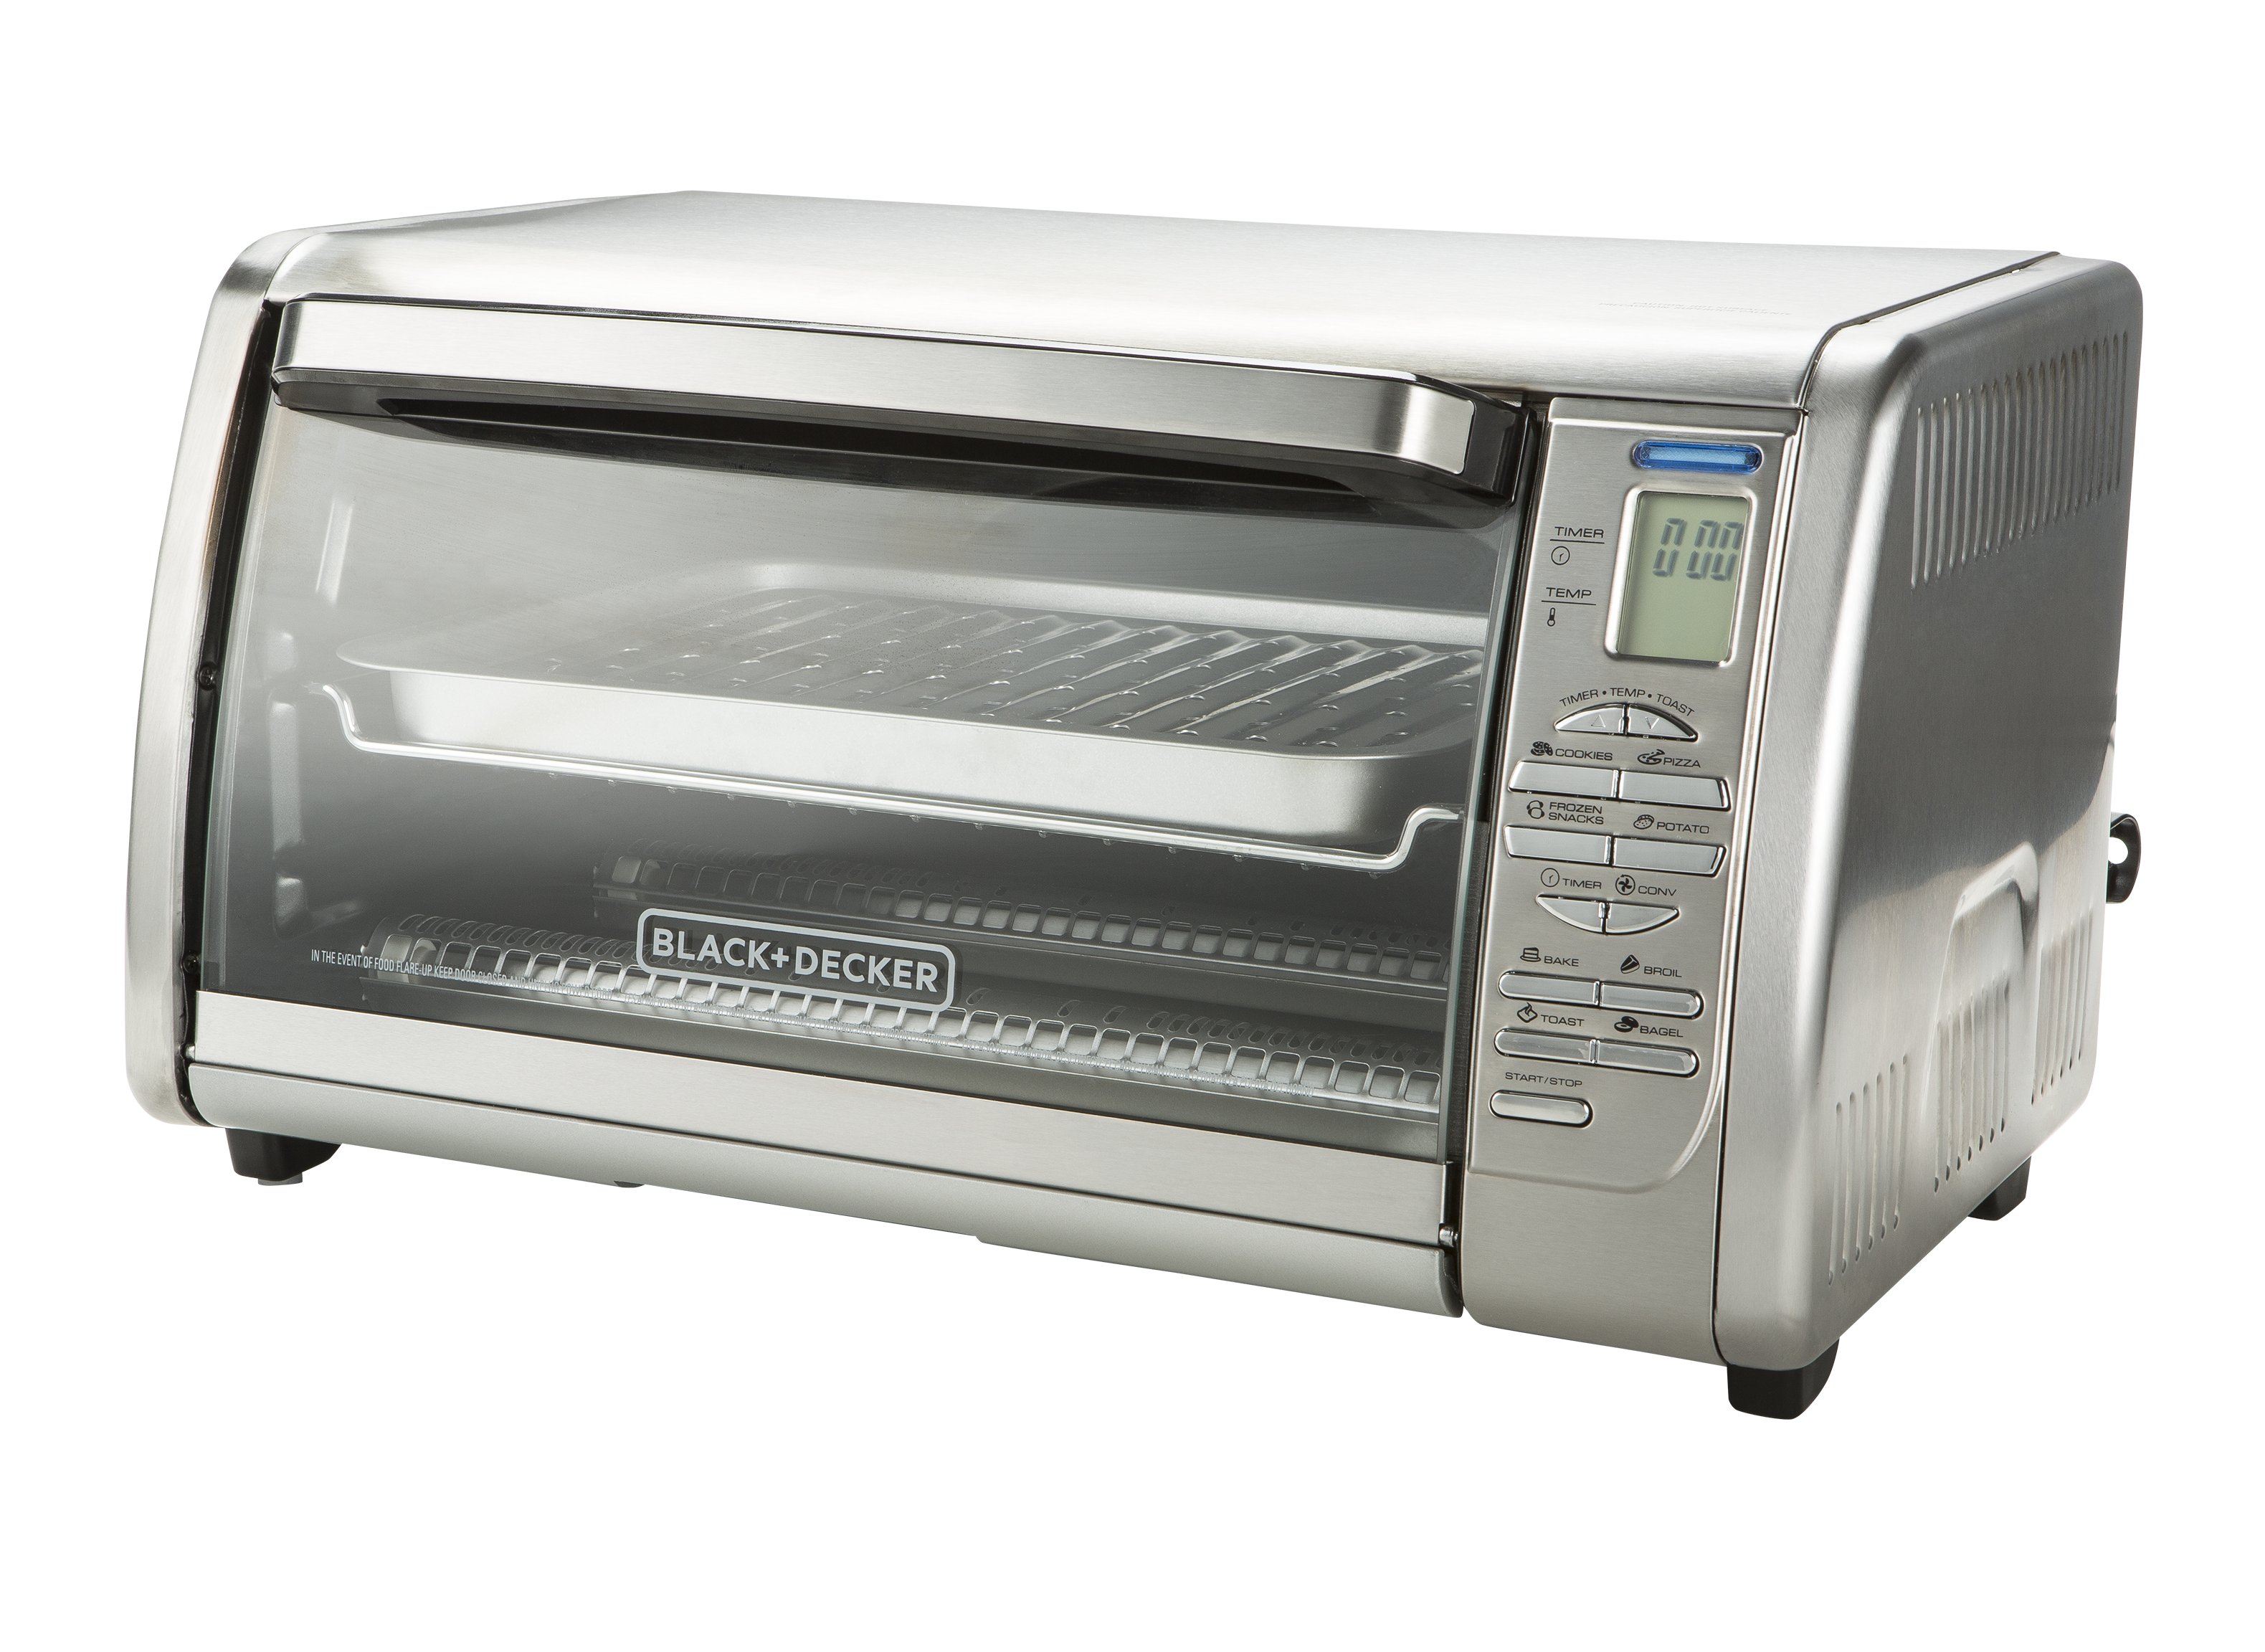 https://crdms.images.consumerreports.org/prod/products/cr/models/387689-toasterovens-blackdecker-6slicedigitalconvectioncto6335ss.png